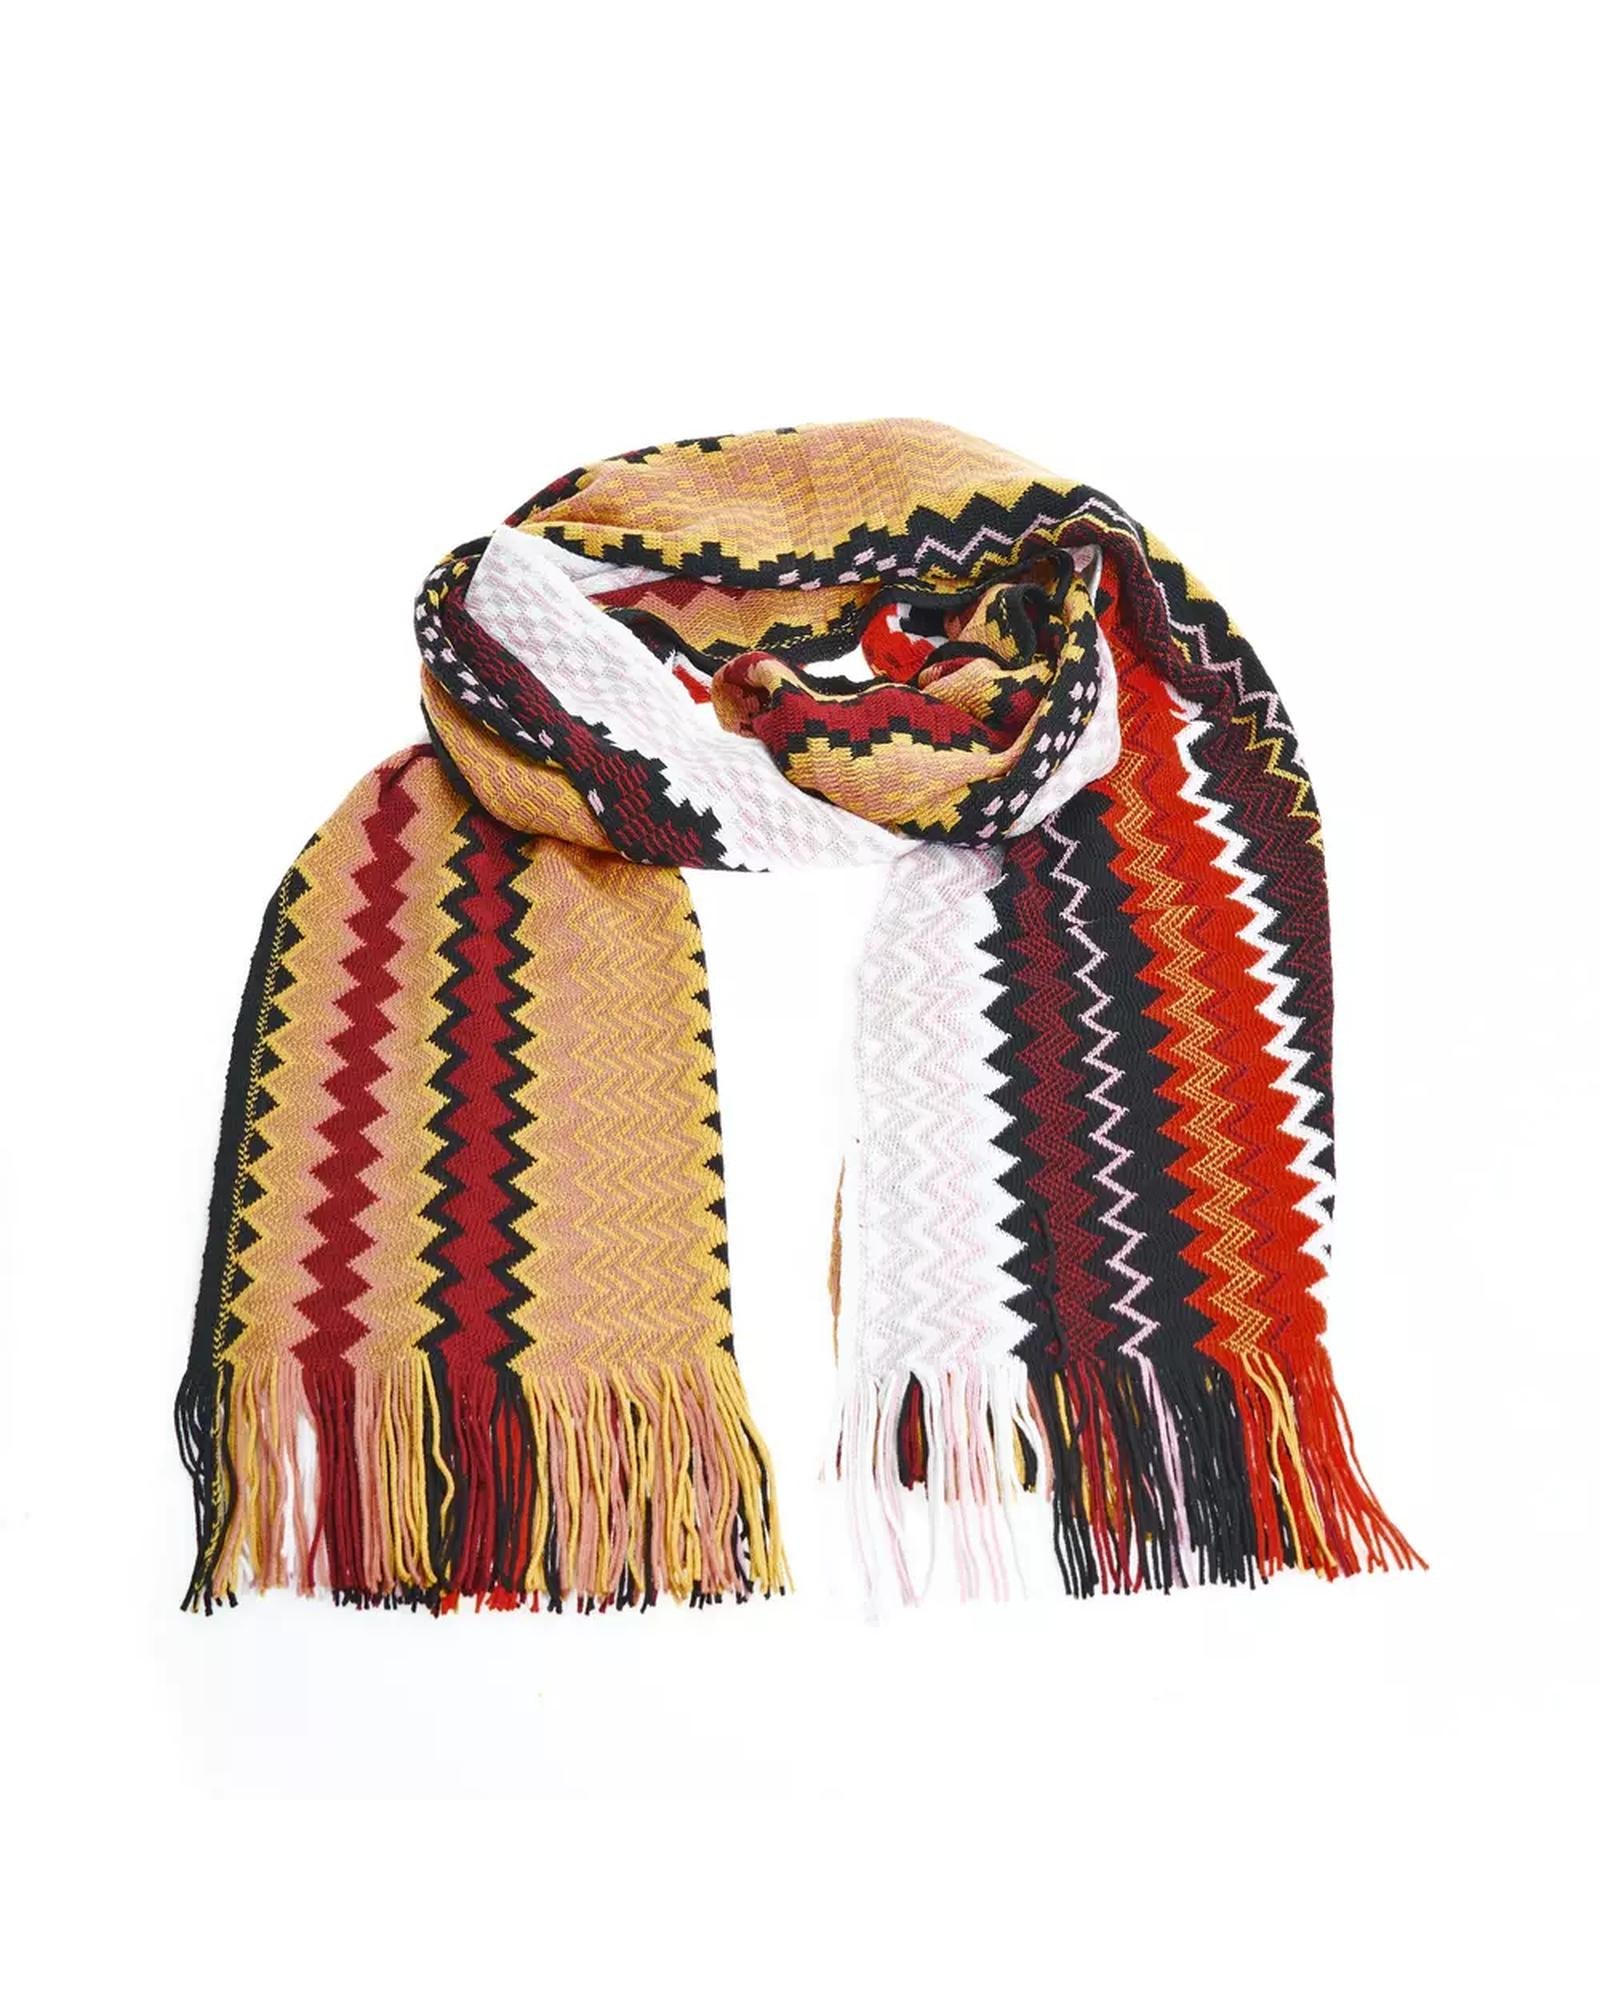 Geometric Pattern Fringed Scarf with Vibrant Colors One Size Women